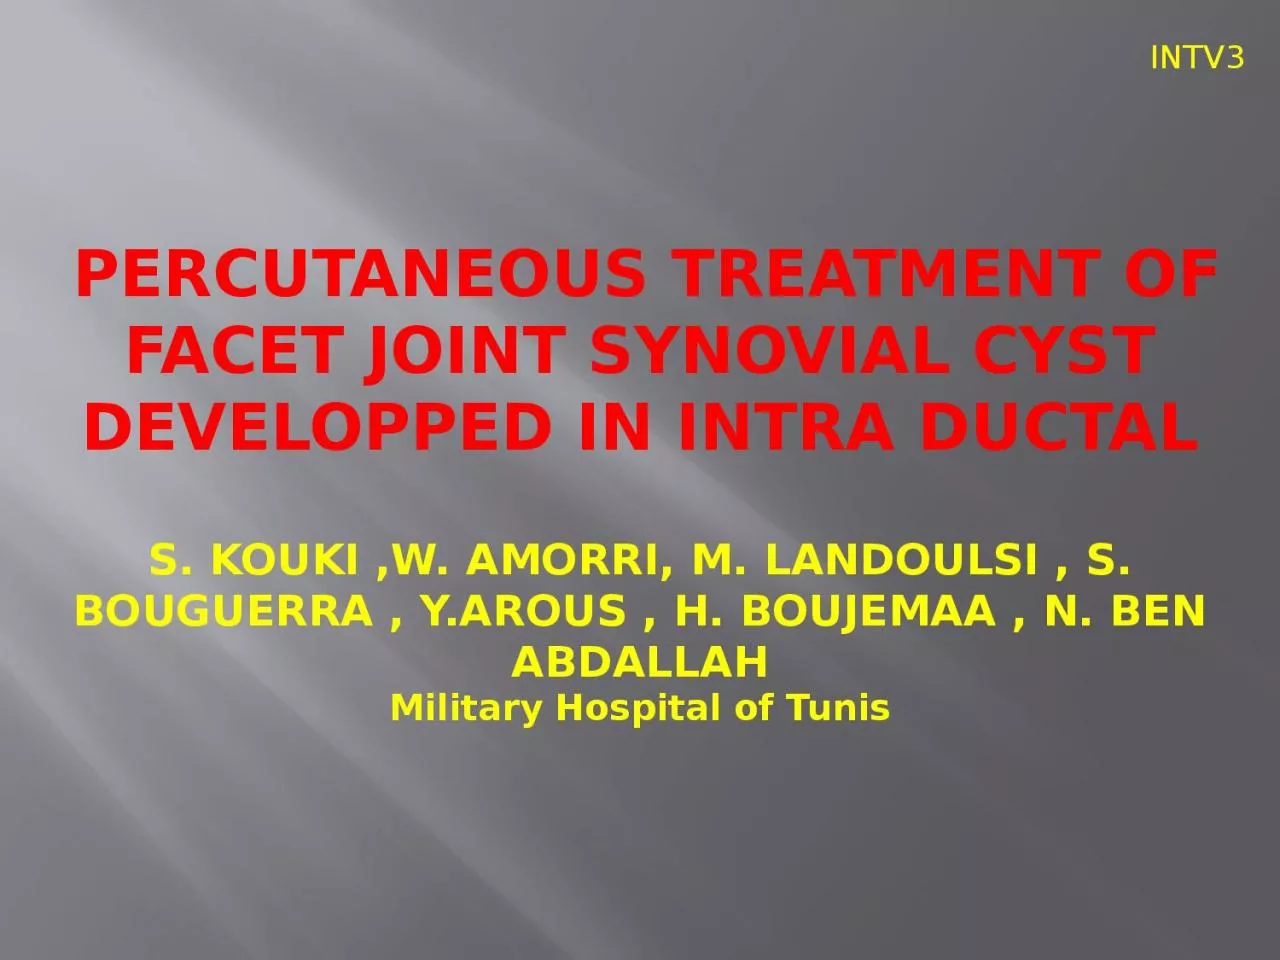 PERCUTANEOUS TREATMENT OF FACET JOINT SYNOVIAL CYST DEVELOPPED IN INTRA DUCTAL